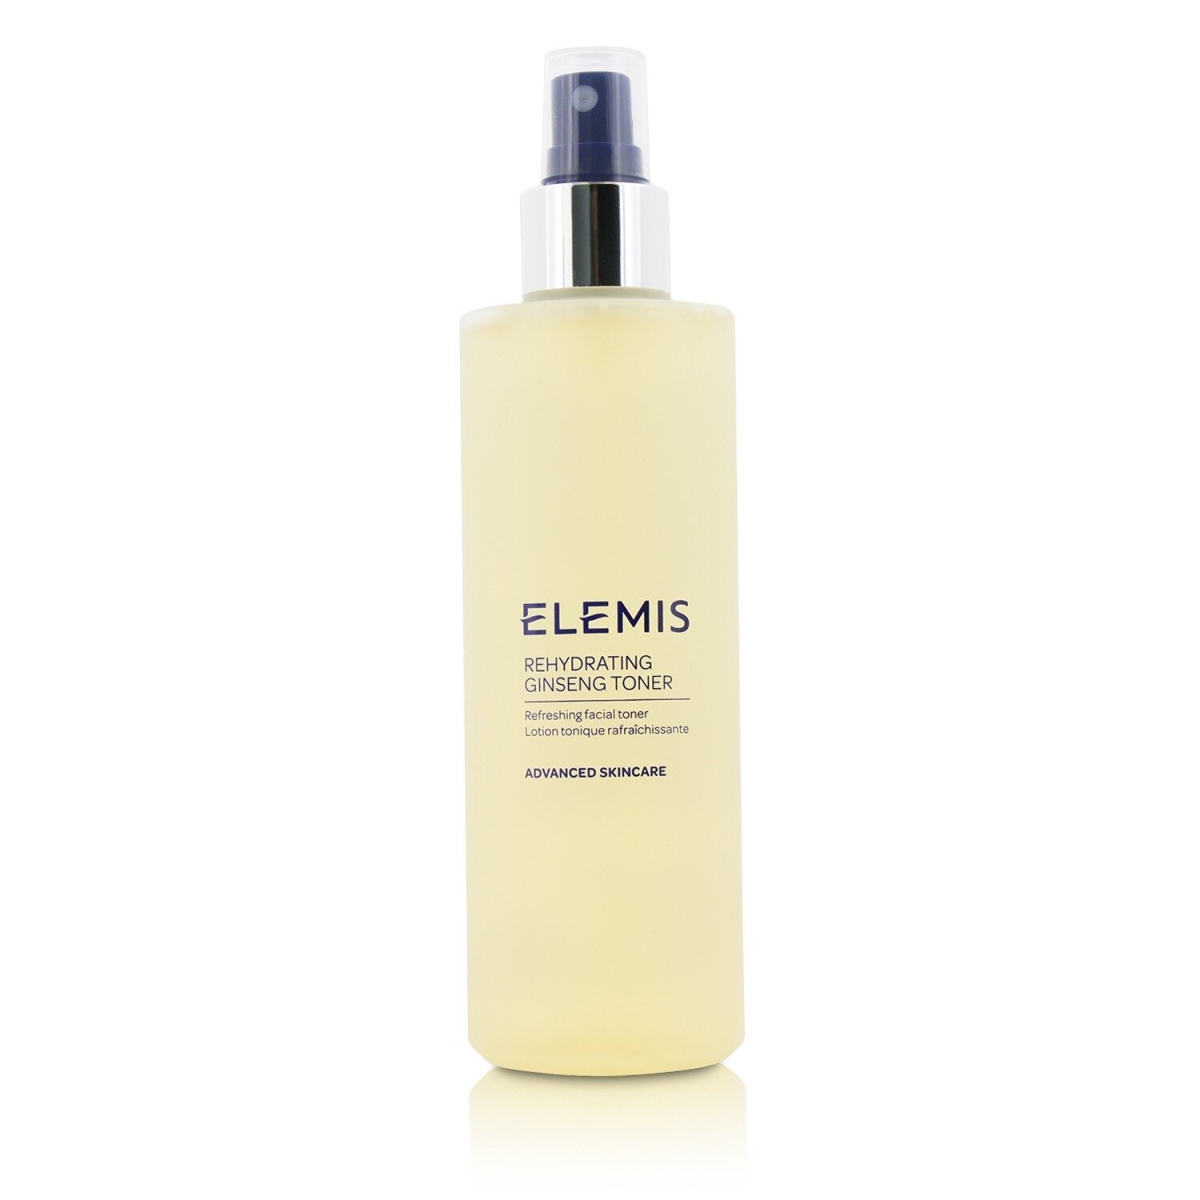 Picture of Elemis 77329 6.7 oz Rehydrating Ginseng Toner